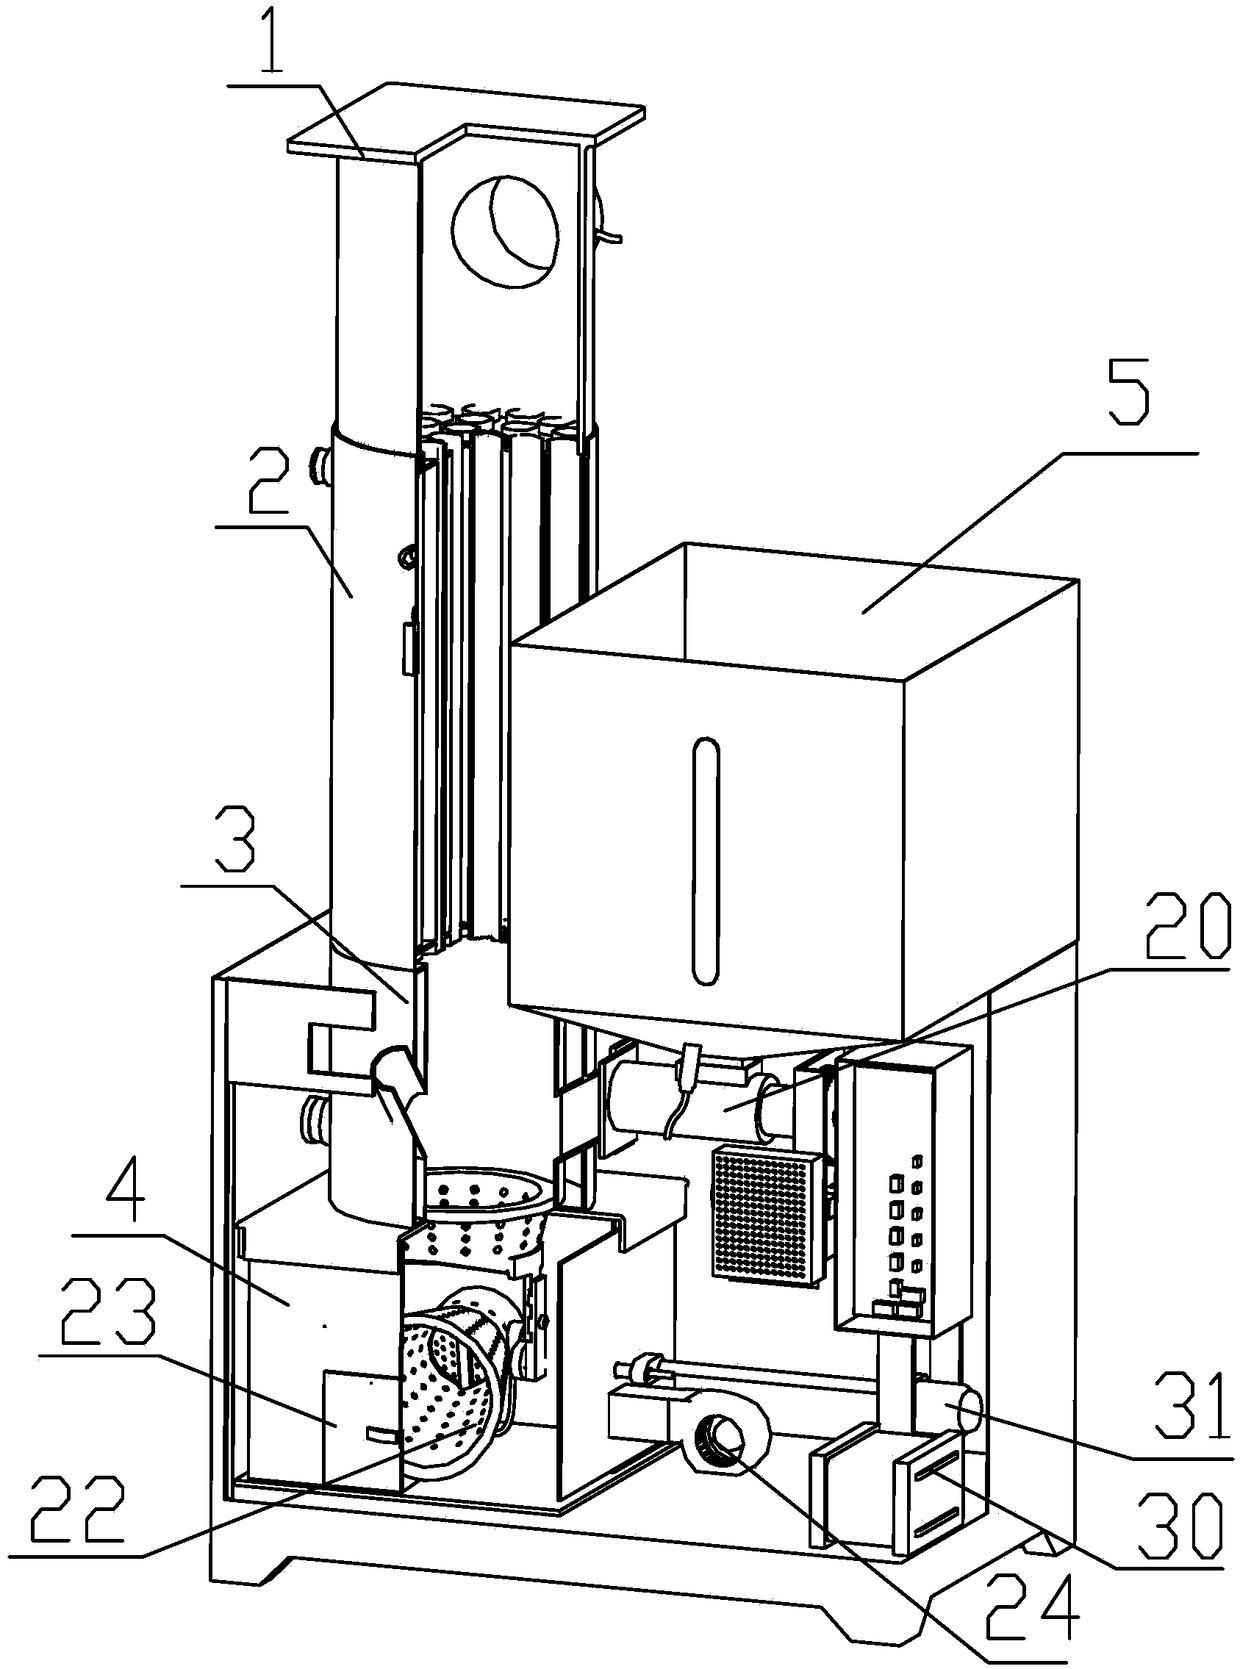 Biomass fuel combustion furnace